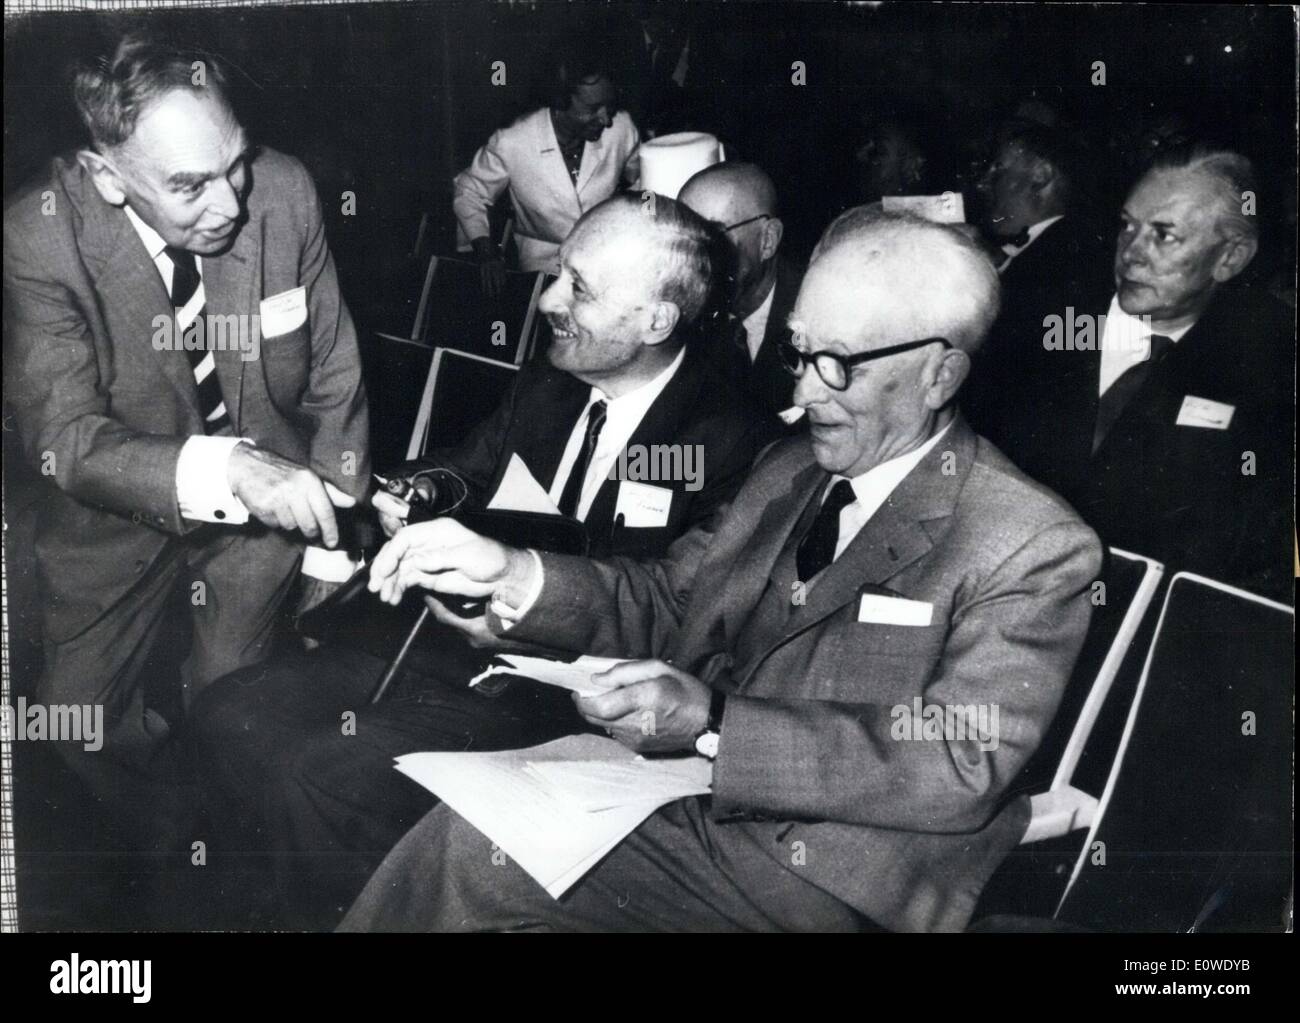 Jun. 26, 1962 - 12th Congress of Nobel-Prize bearers in Lindau: On June 25th, 1962, the 12th Congress of Nobel-Prize bearers began in Lindau at Lake Constance (Southern Germany). This time, the theme of the congress is ''Physics'', and about 22 Nobel-Prize bearers take part in this meeting. Photo shows (left to right) Prof. Otto Hahn (HAHN) of Goettingen, Germany; Prof. James Franck (FRANCK) who had been at Goettingen some time ago and who is now at Durham, North Carolina/USA; Prof. Max Born (Born), Bad Pyrmont, Germany; on right in second row Prof Stock Photo